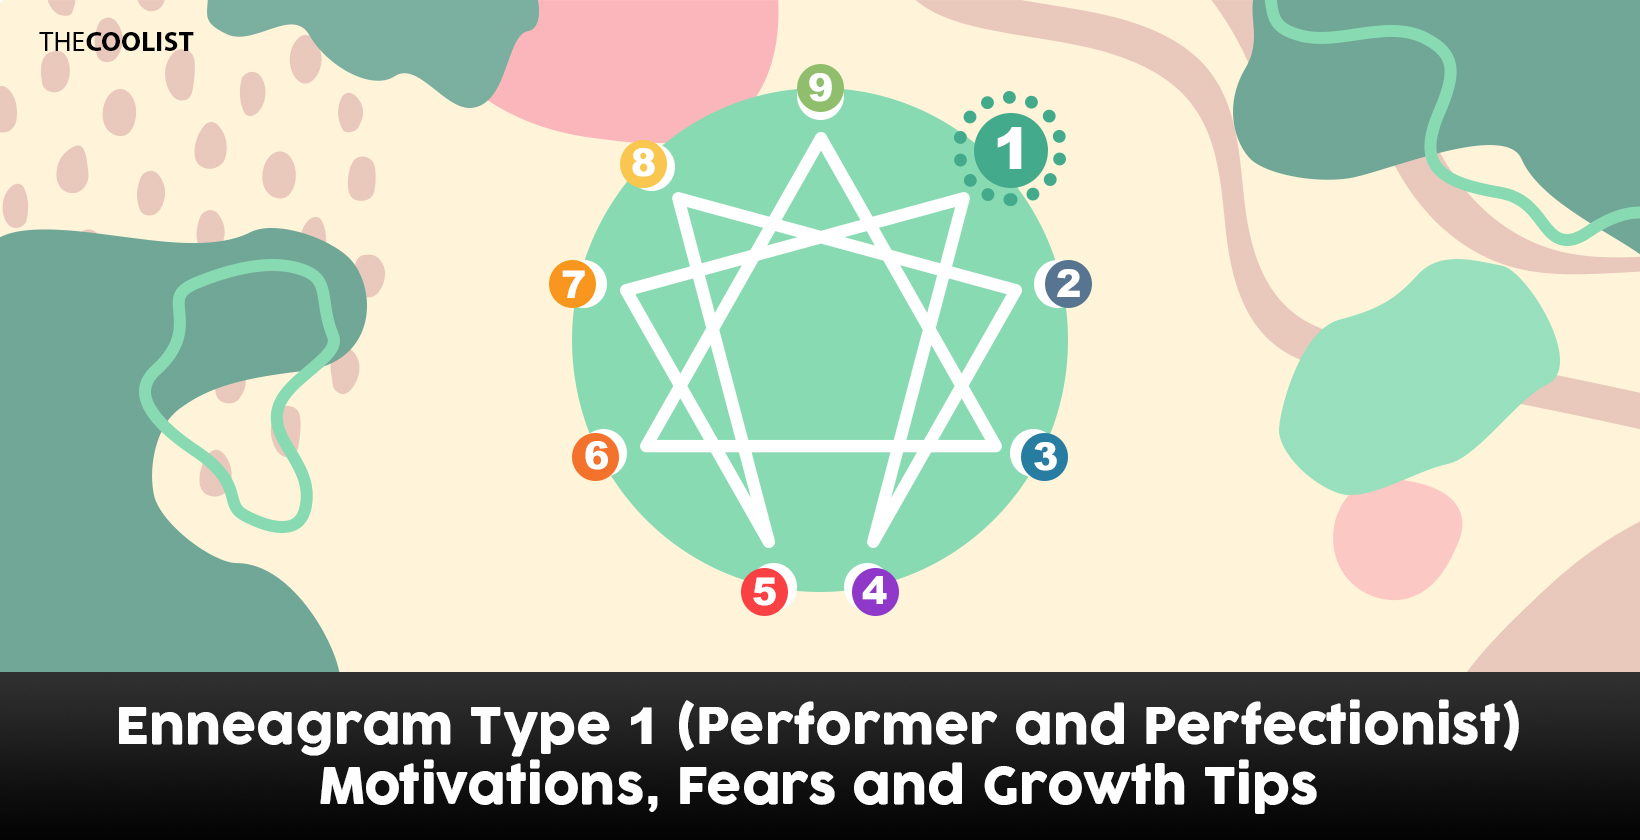 Enneagram Type 1 (Performer and Perfectionist) Motivations, Fears and Growth Tips